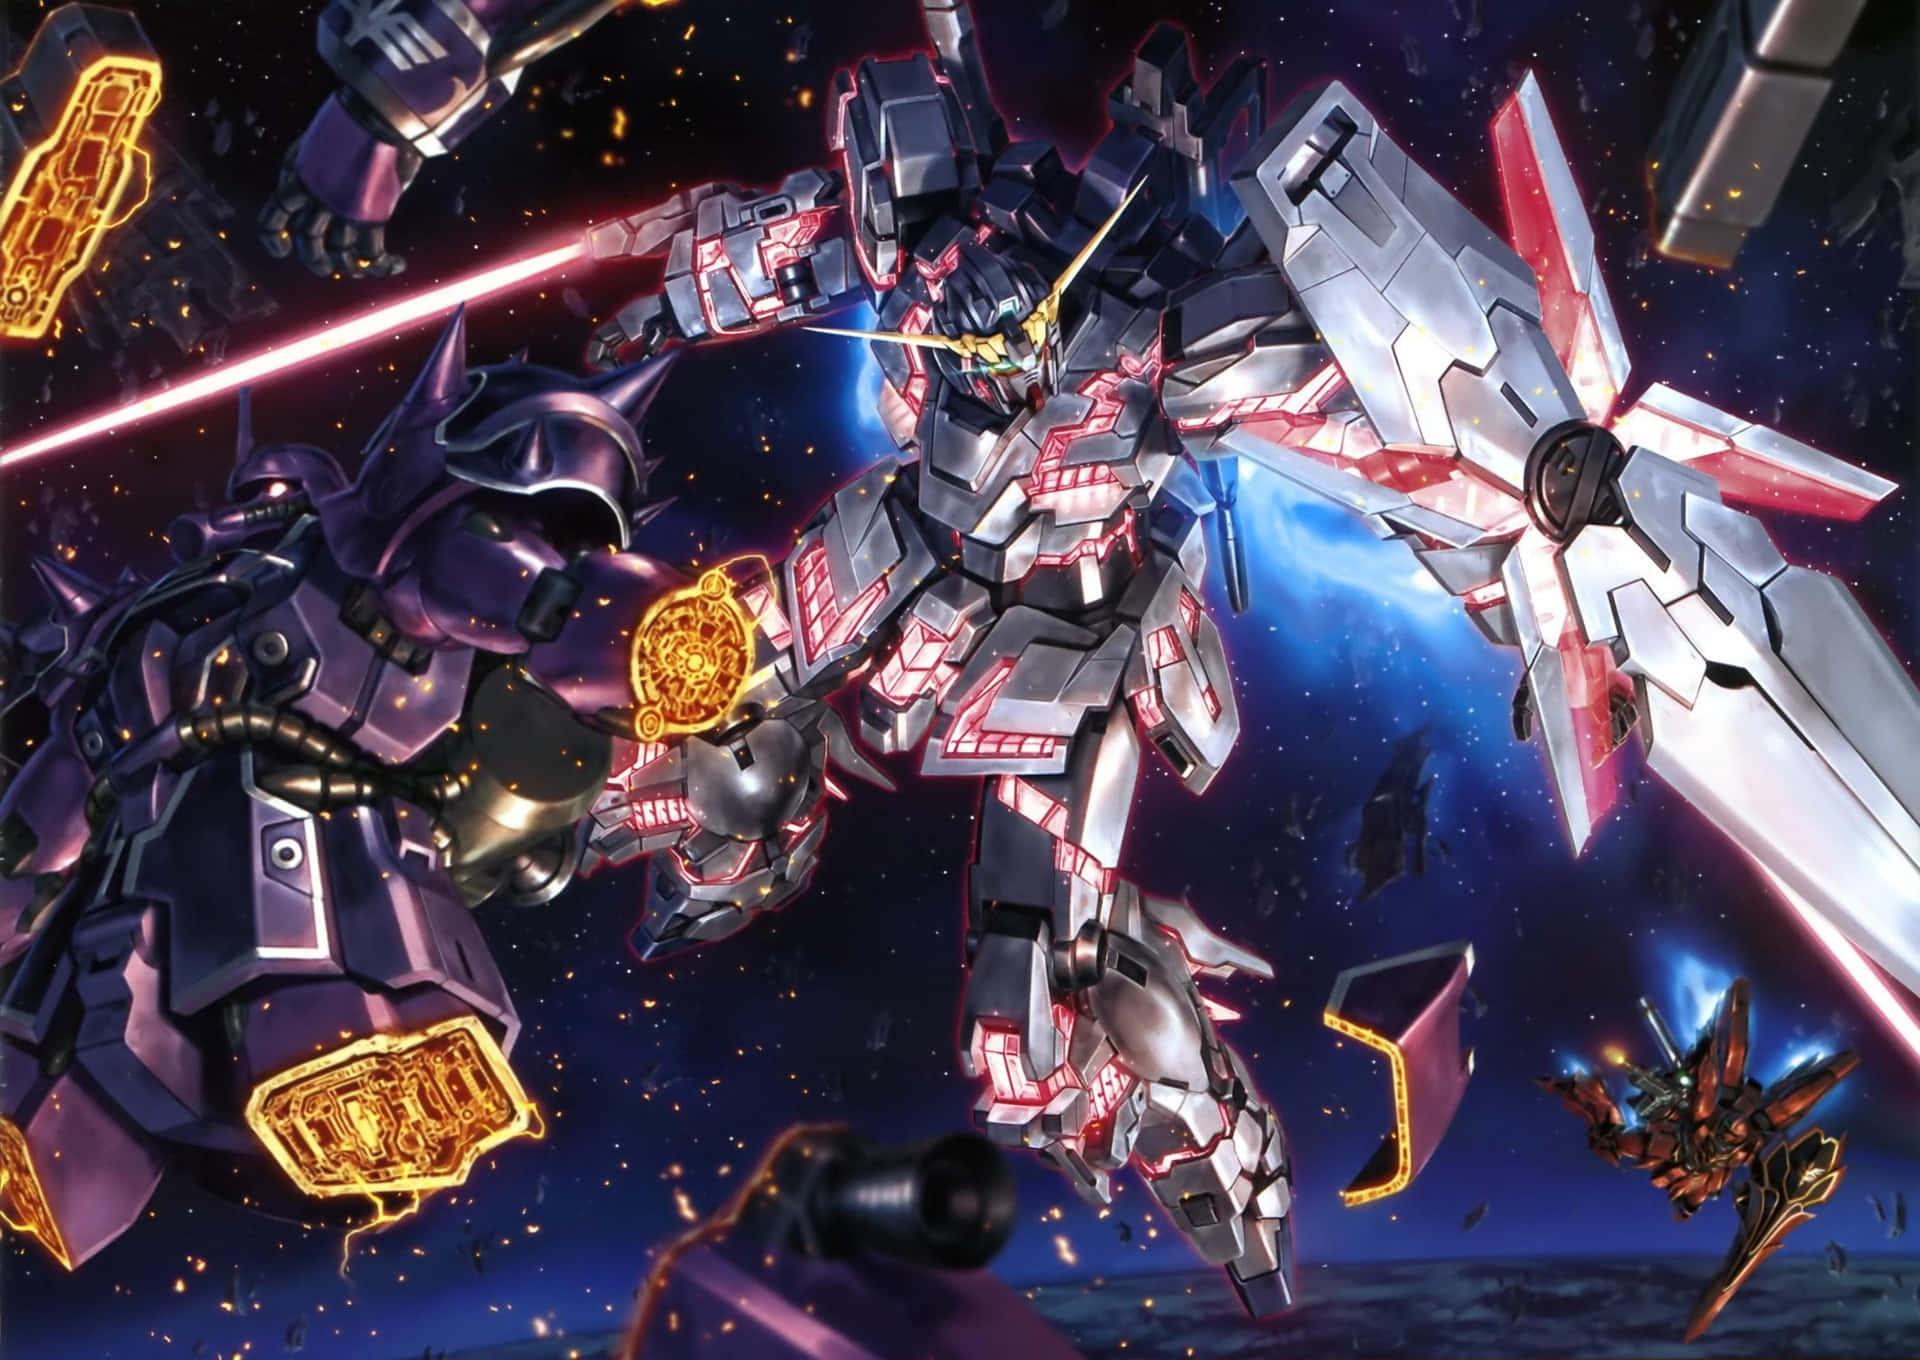 Explore the world of Gundam with the 4K version Wallpaper